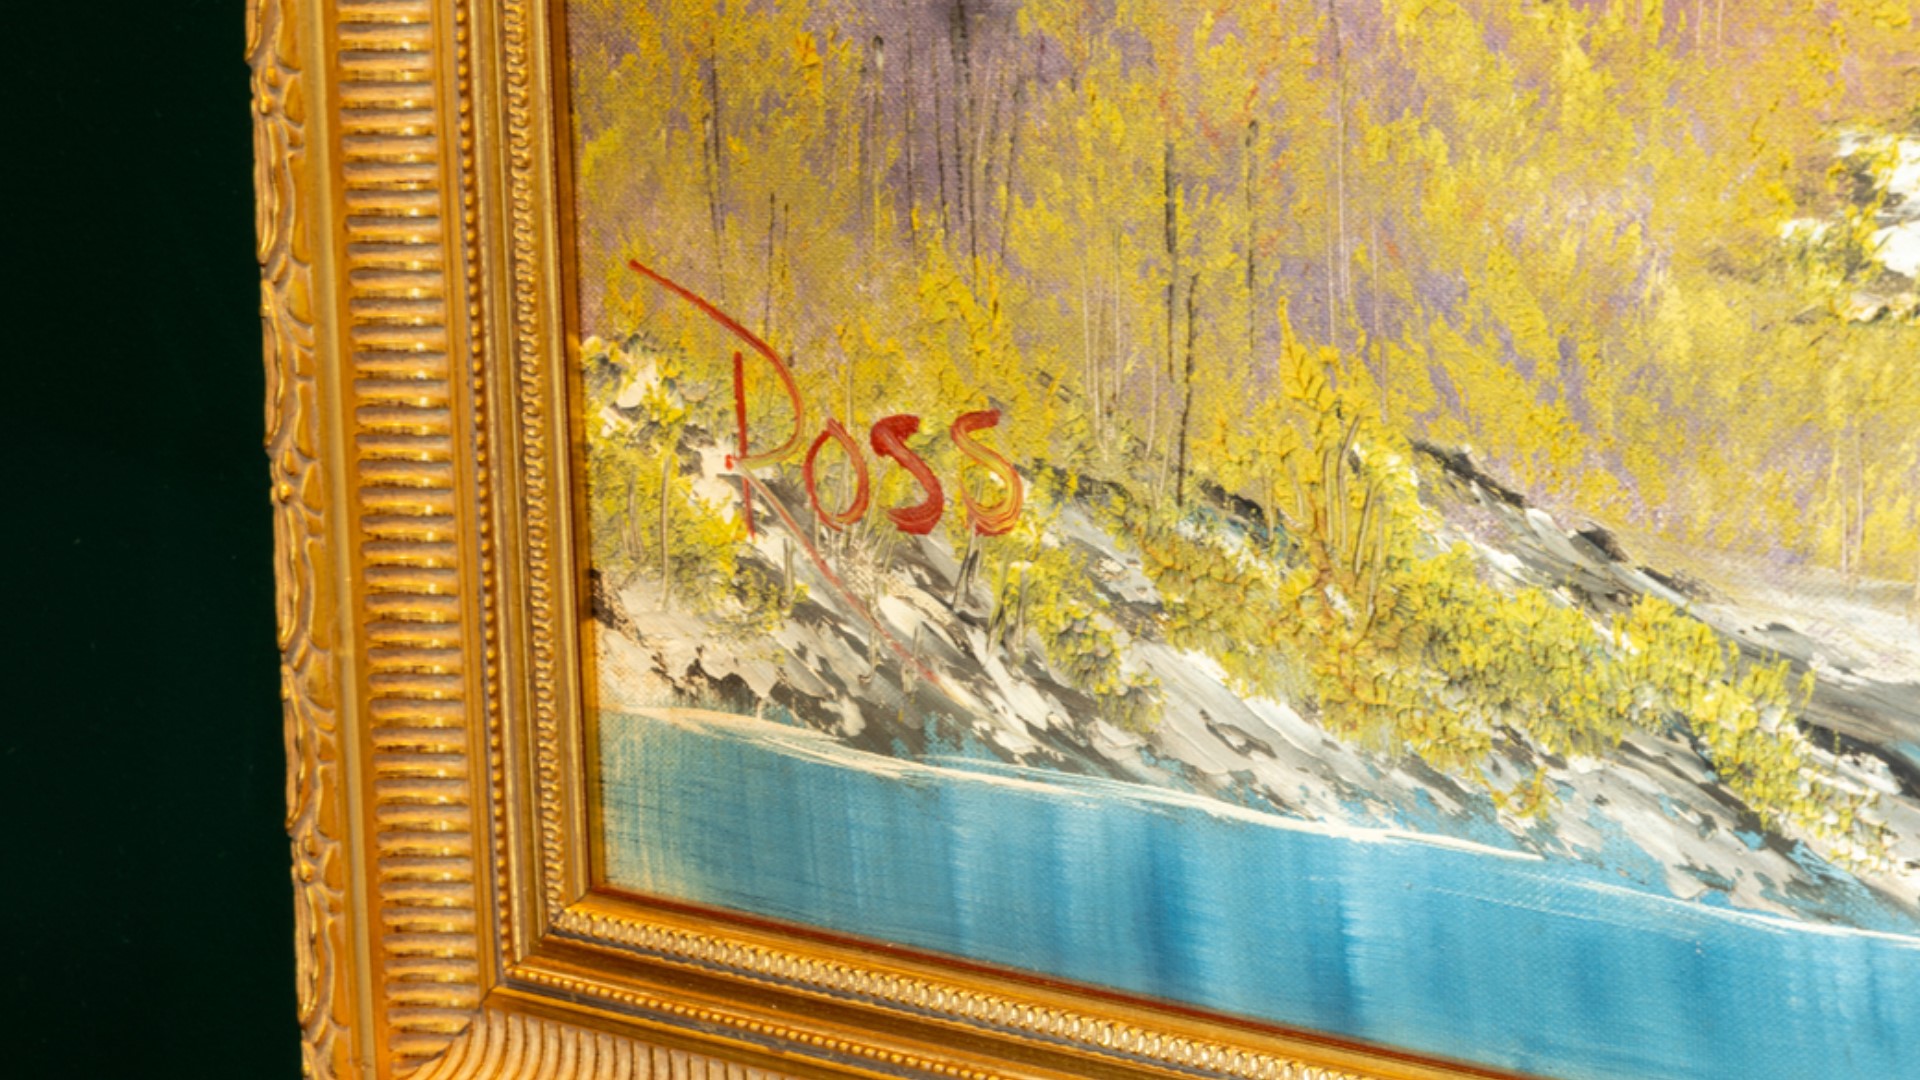 Rare Bob Ross painting listed for nearly $10 million